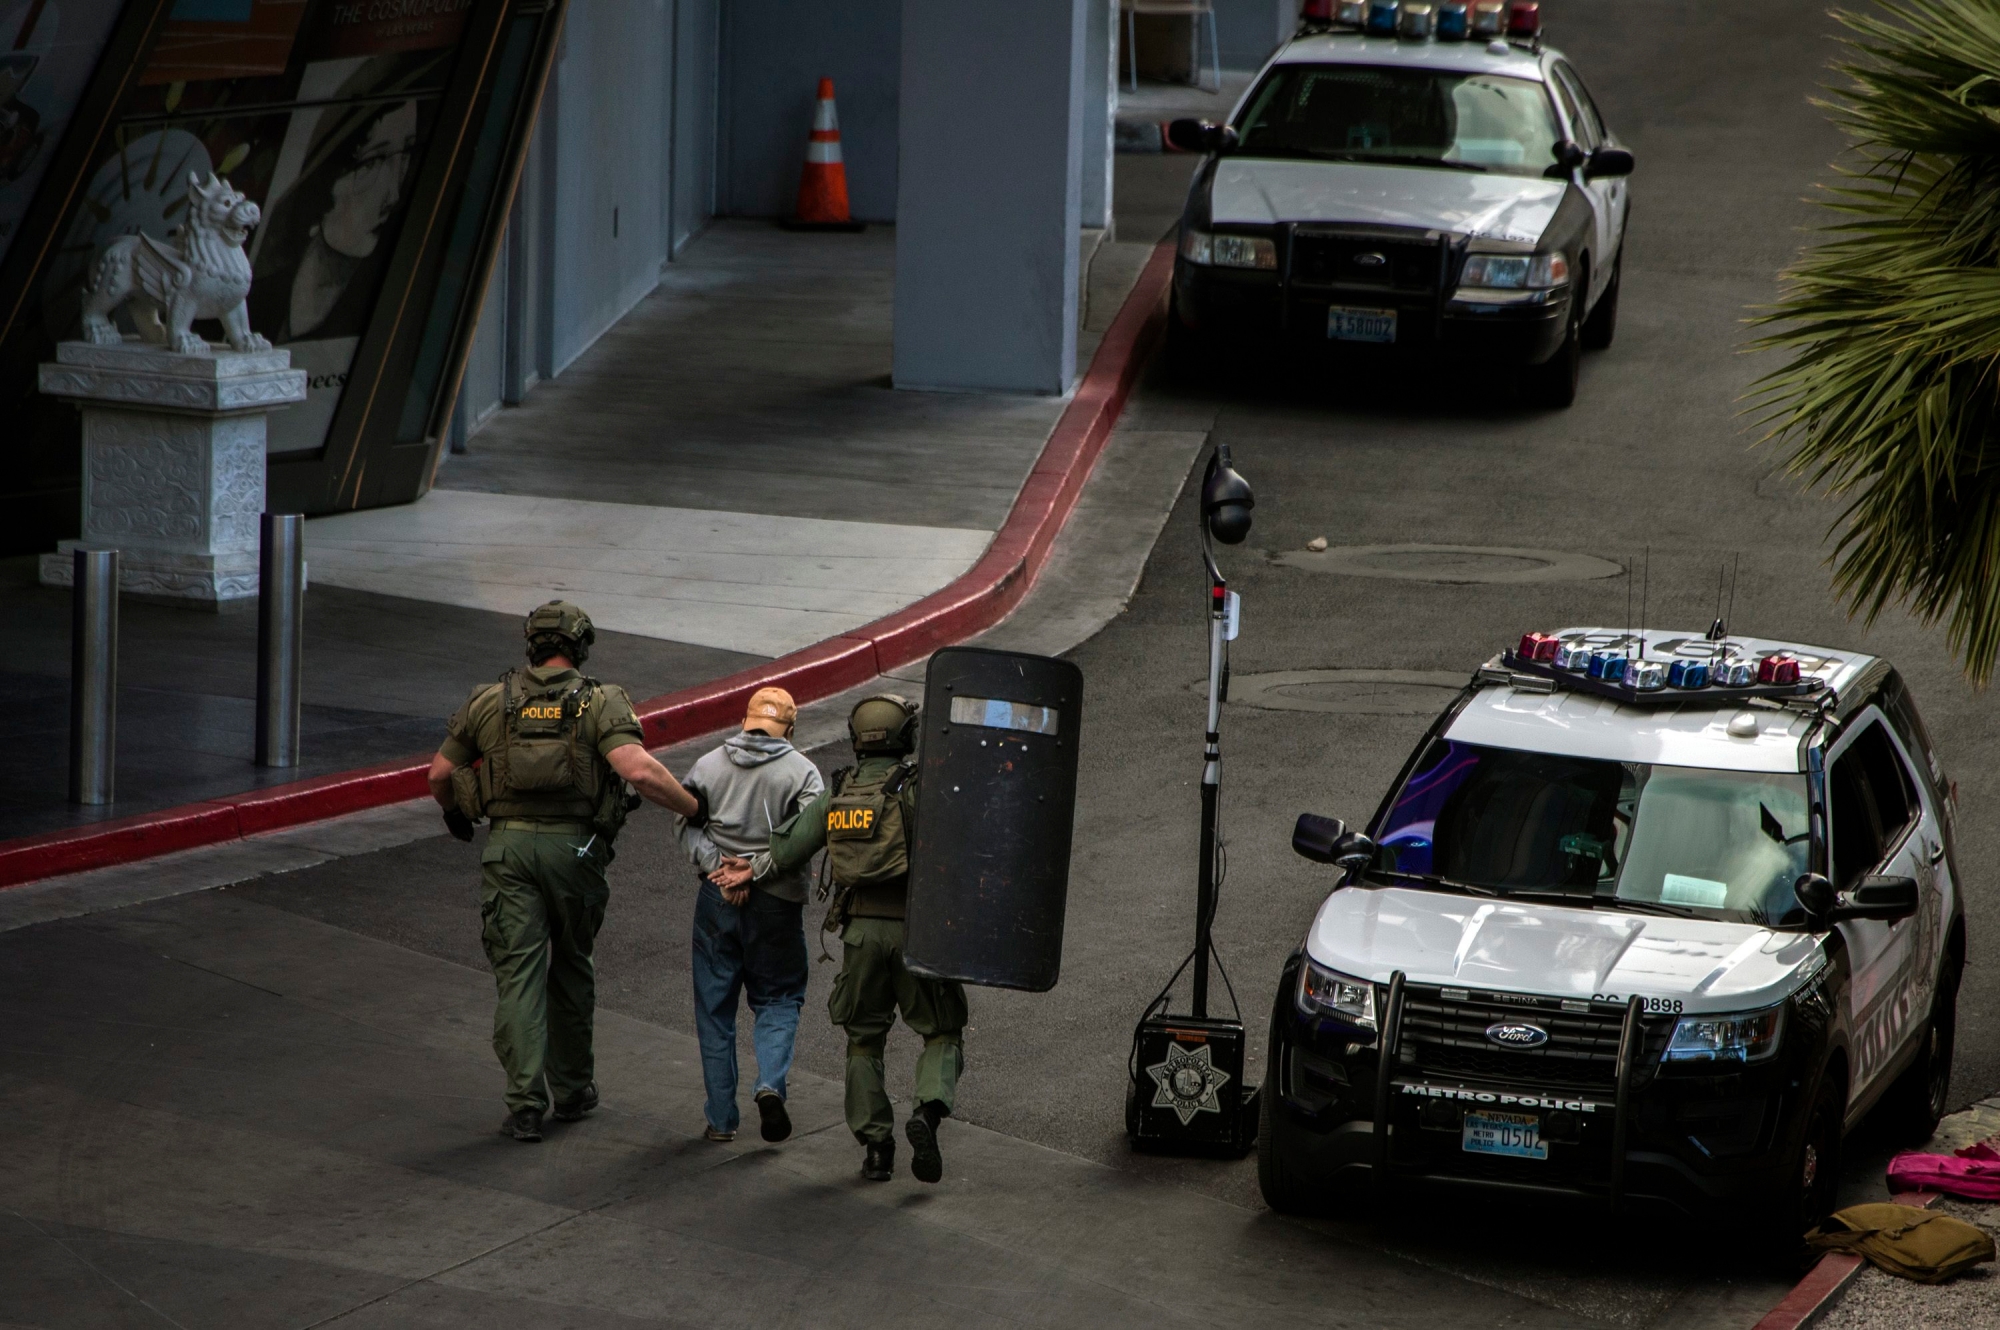 A suspect is taken away after surrendering to SWAT officers after he barricaded himself inside a public bus after a fatal shooting in the vehicle earlier today shutting down the busy tourism corridor near the Cosmopolitan hotel-casino in Las Vegas, Saturday, March 25, 2017. (L.E. Baskow/Las Vegas Sun via AP) APTOPIX Vegas Strip Shooting